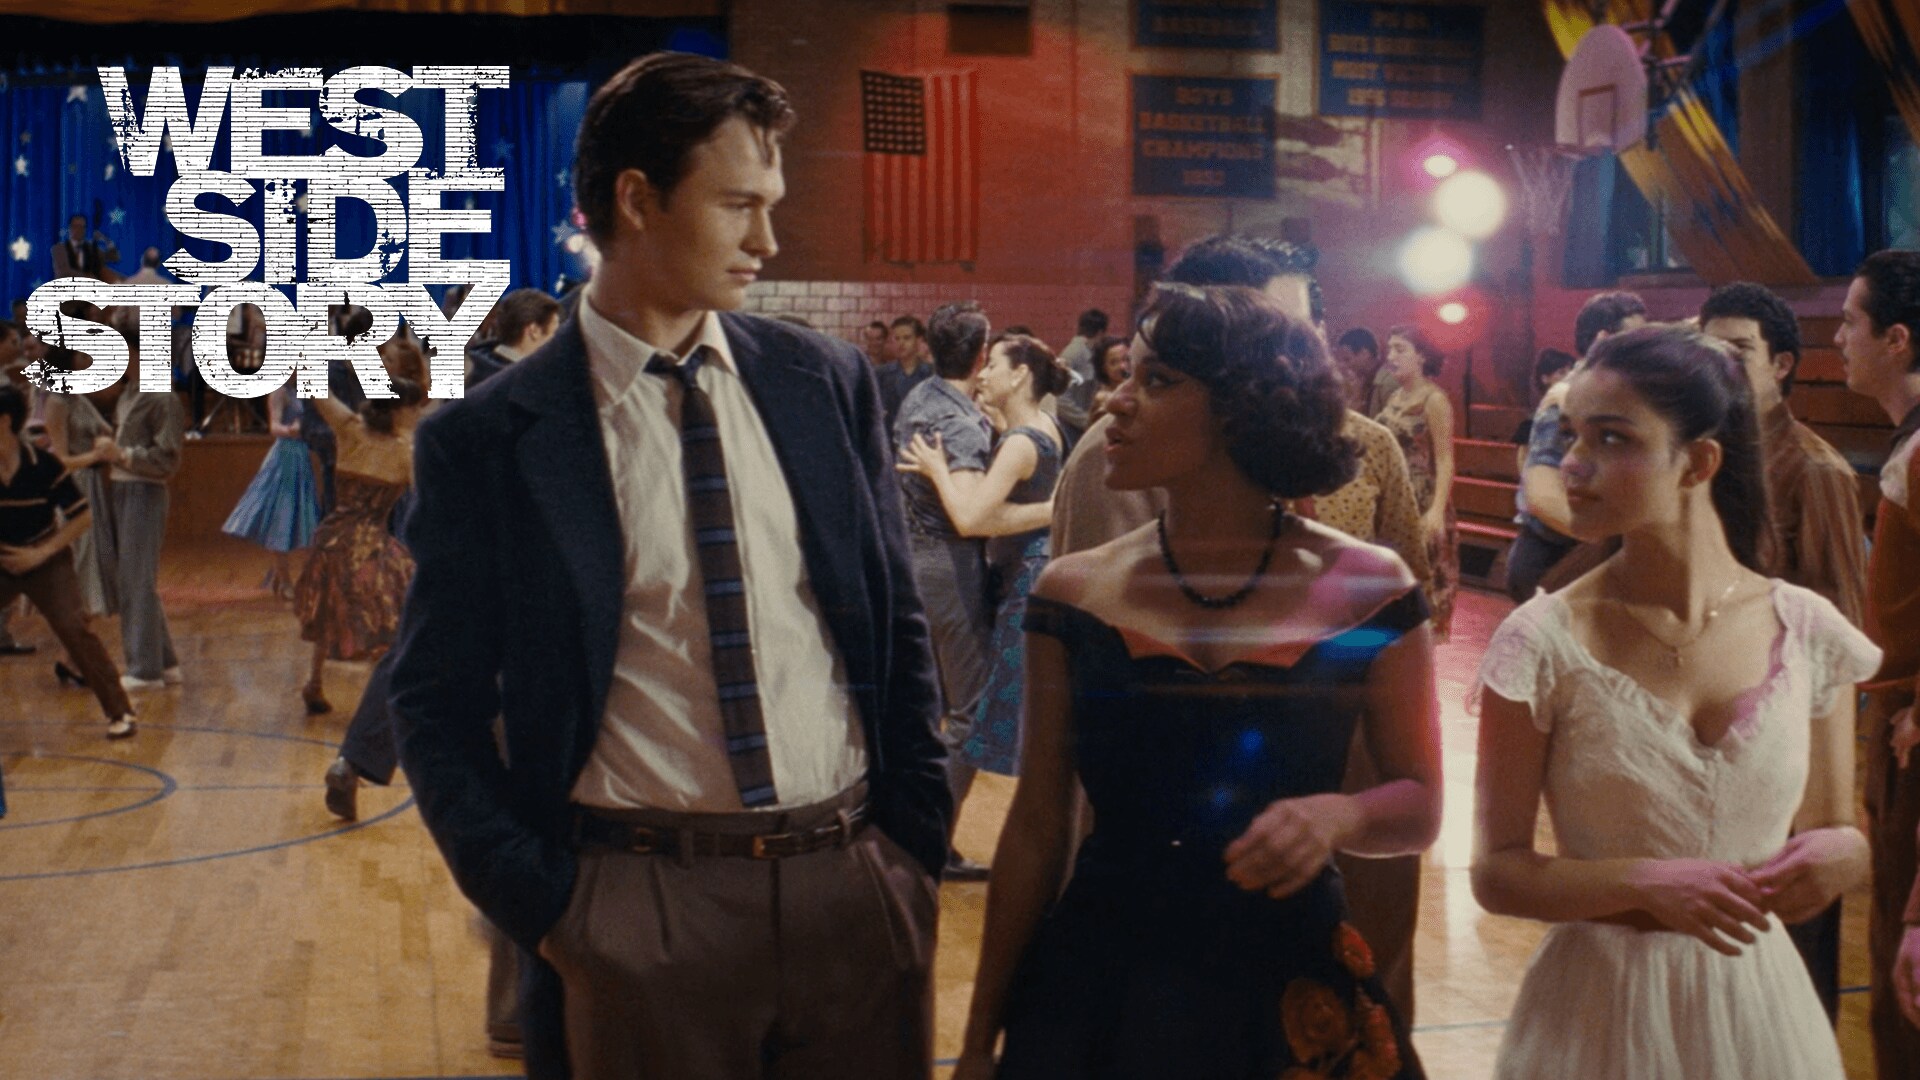 Their love will change everything. Experience Steven Spielberg’s #WestSideStory only in theaters December 10.